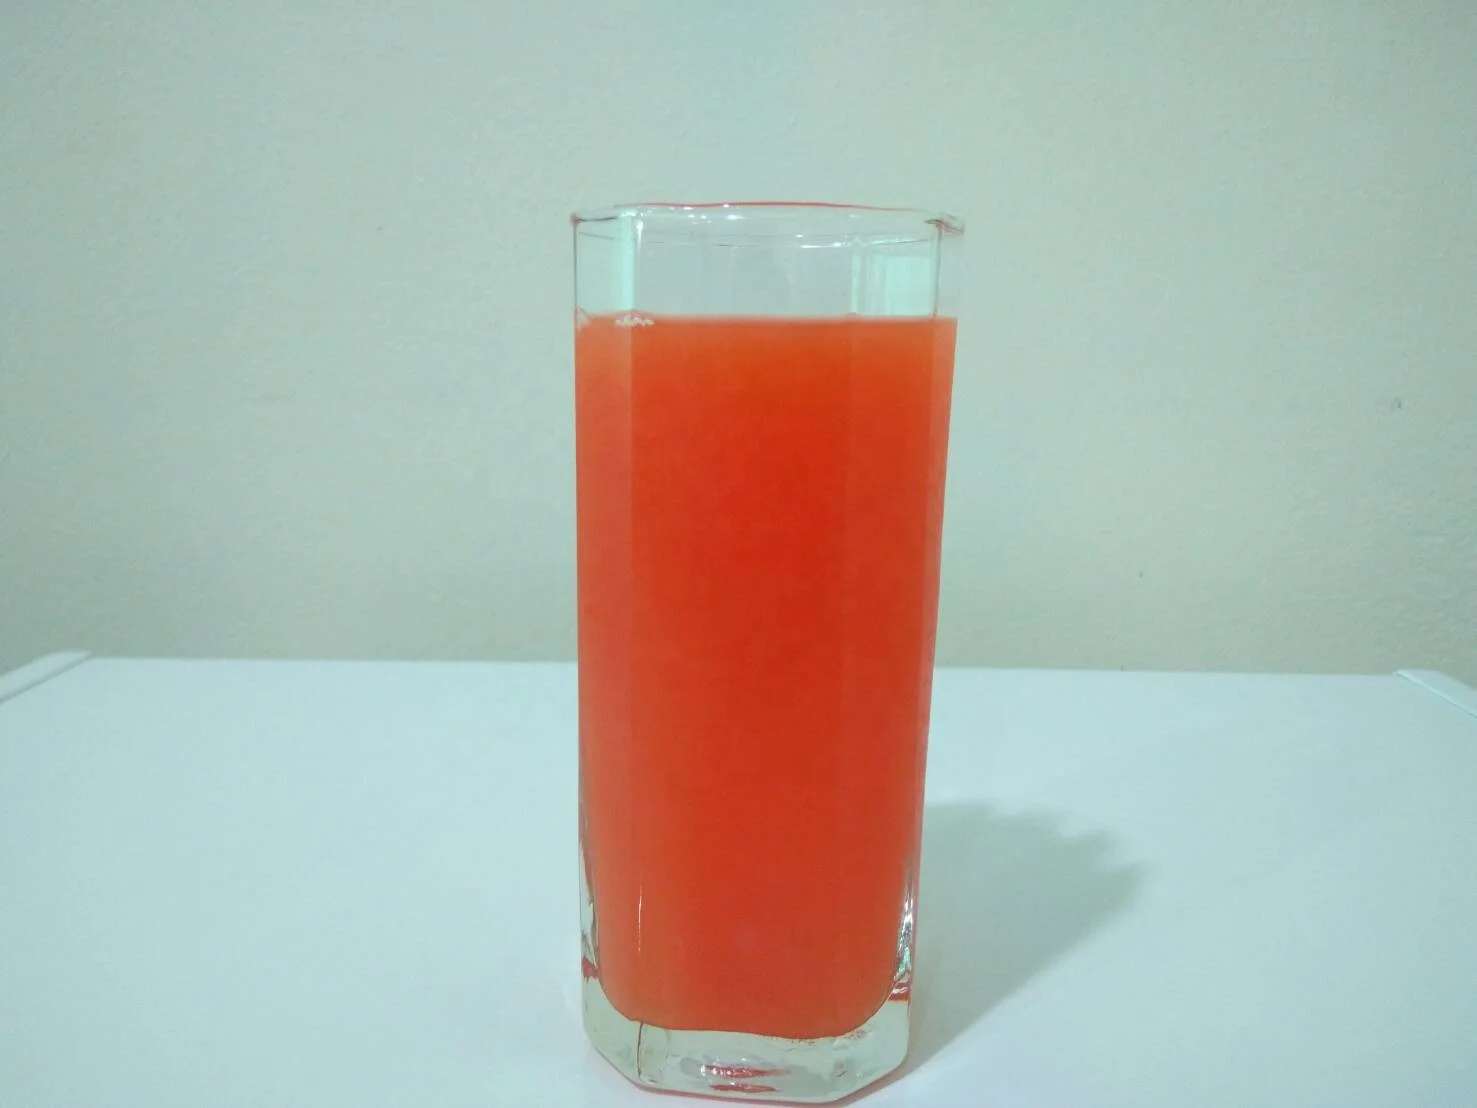 High Quality Refreshing and Concentrated Instant Mixed Fruit Juice Powder Drink from Thailand with 15 Kg per Carton